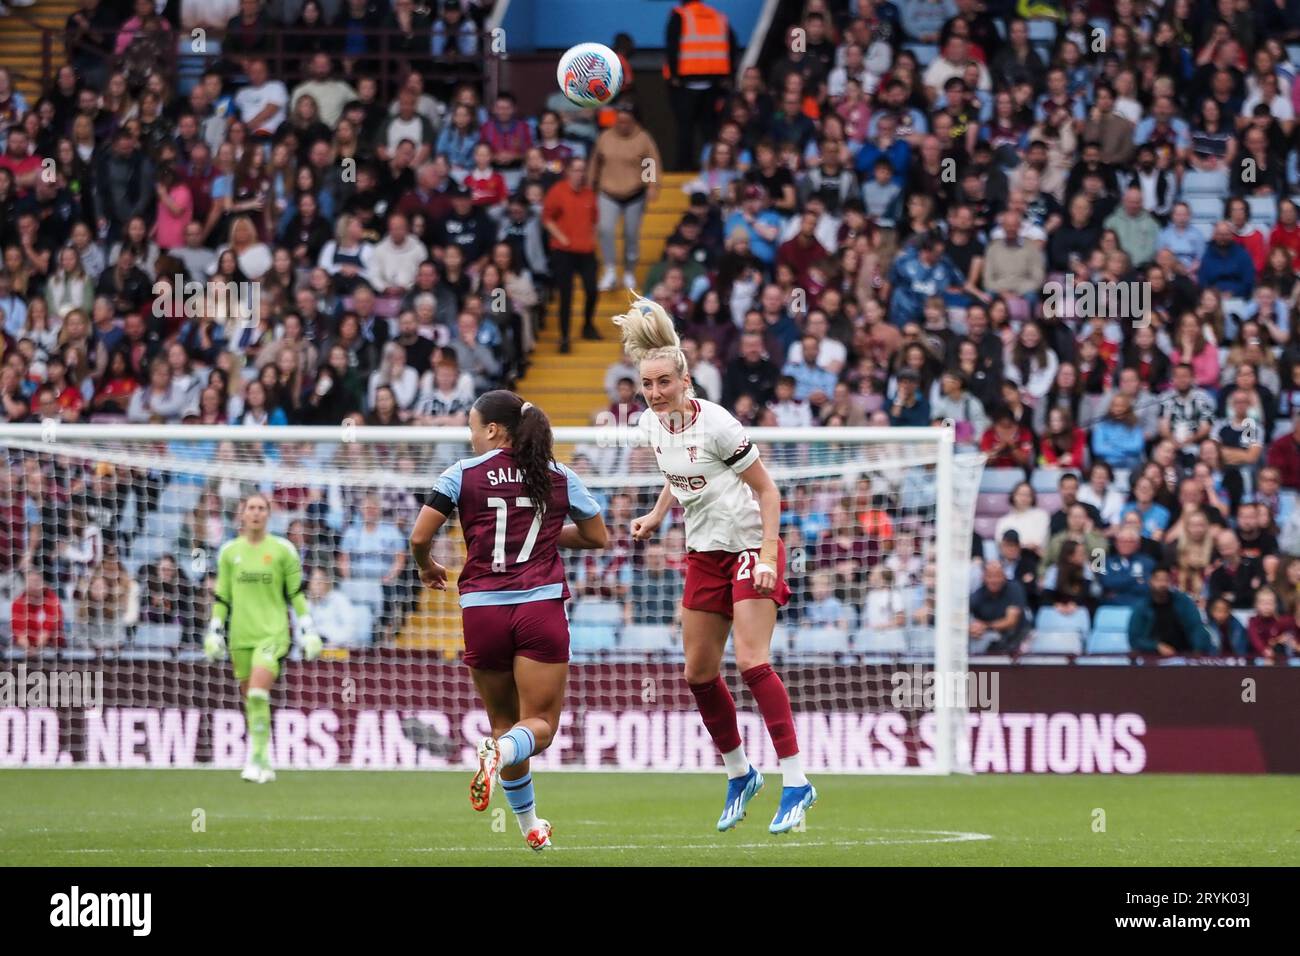 Birmingham, UK. 01st Oct, 2023. Birmingham, England, October 1st 2023: Millie Turner (21 Manchester United) heads the ball during the Barclays FA Womens Super League match between Aston Villa and Manchester United at Villa Park in Birmingham, England (Natalie Mincher/SPP) Credit: SPP Sport Press Photo. /Alamy Live News Stock Photo